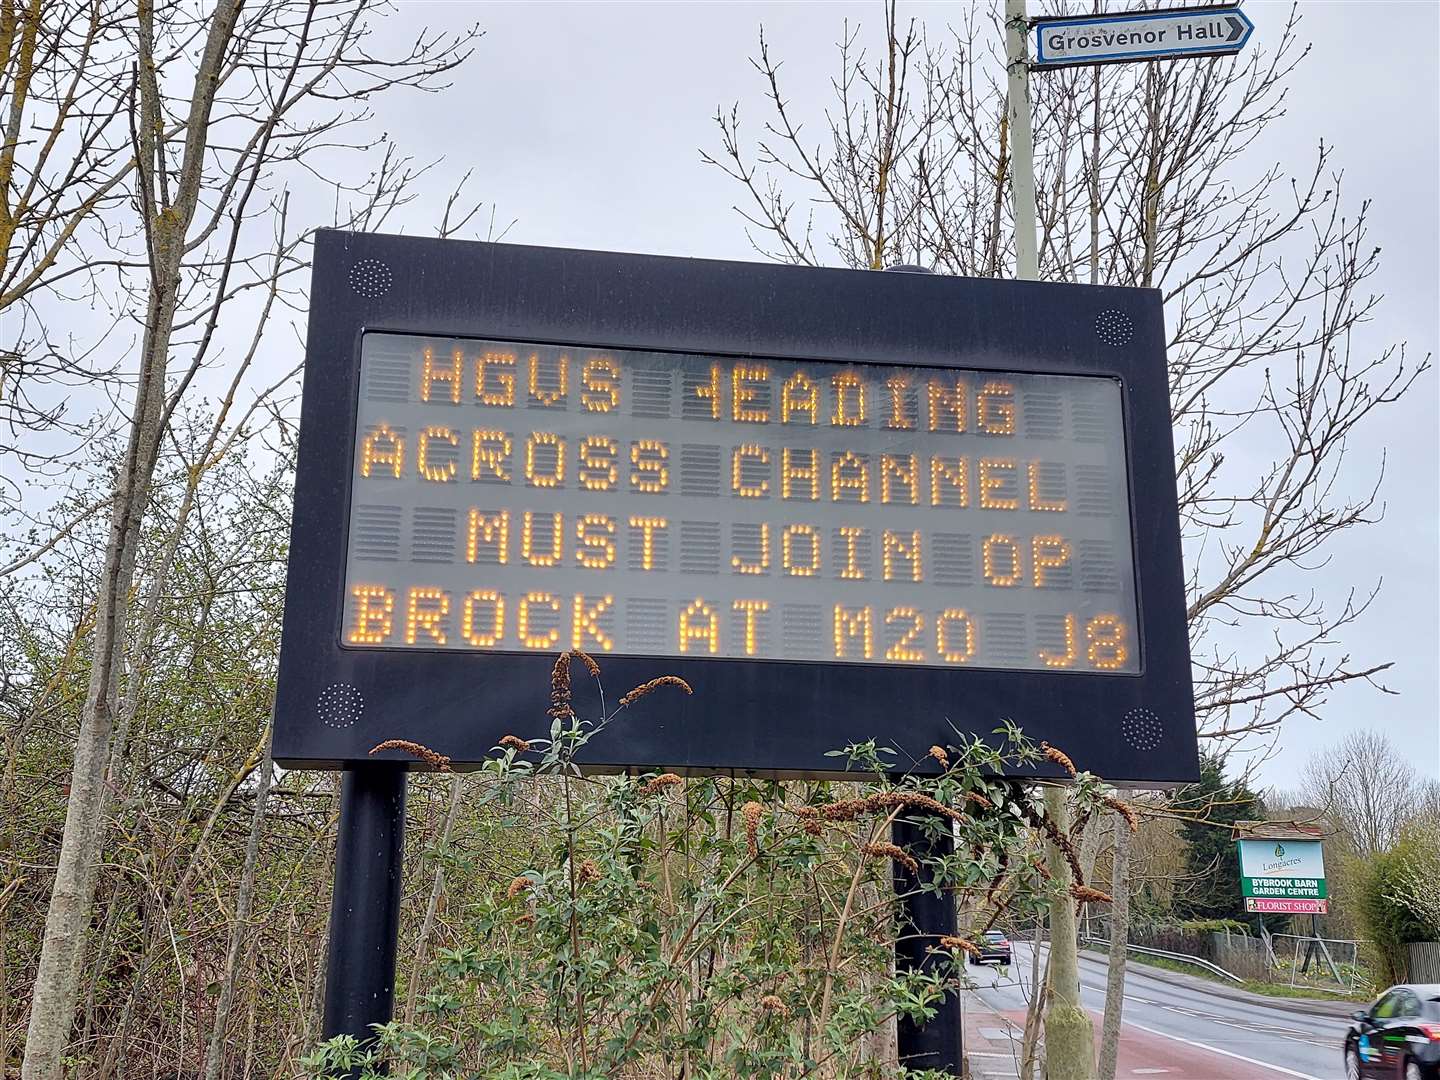 Dover-bound HGVs are told to join Brock at Junction 8 of the M20